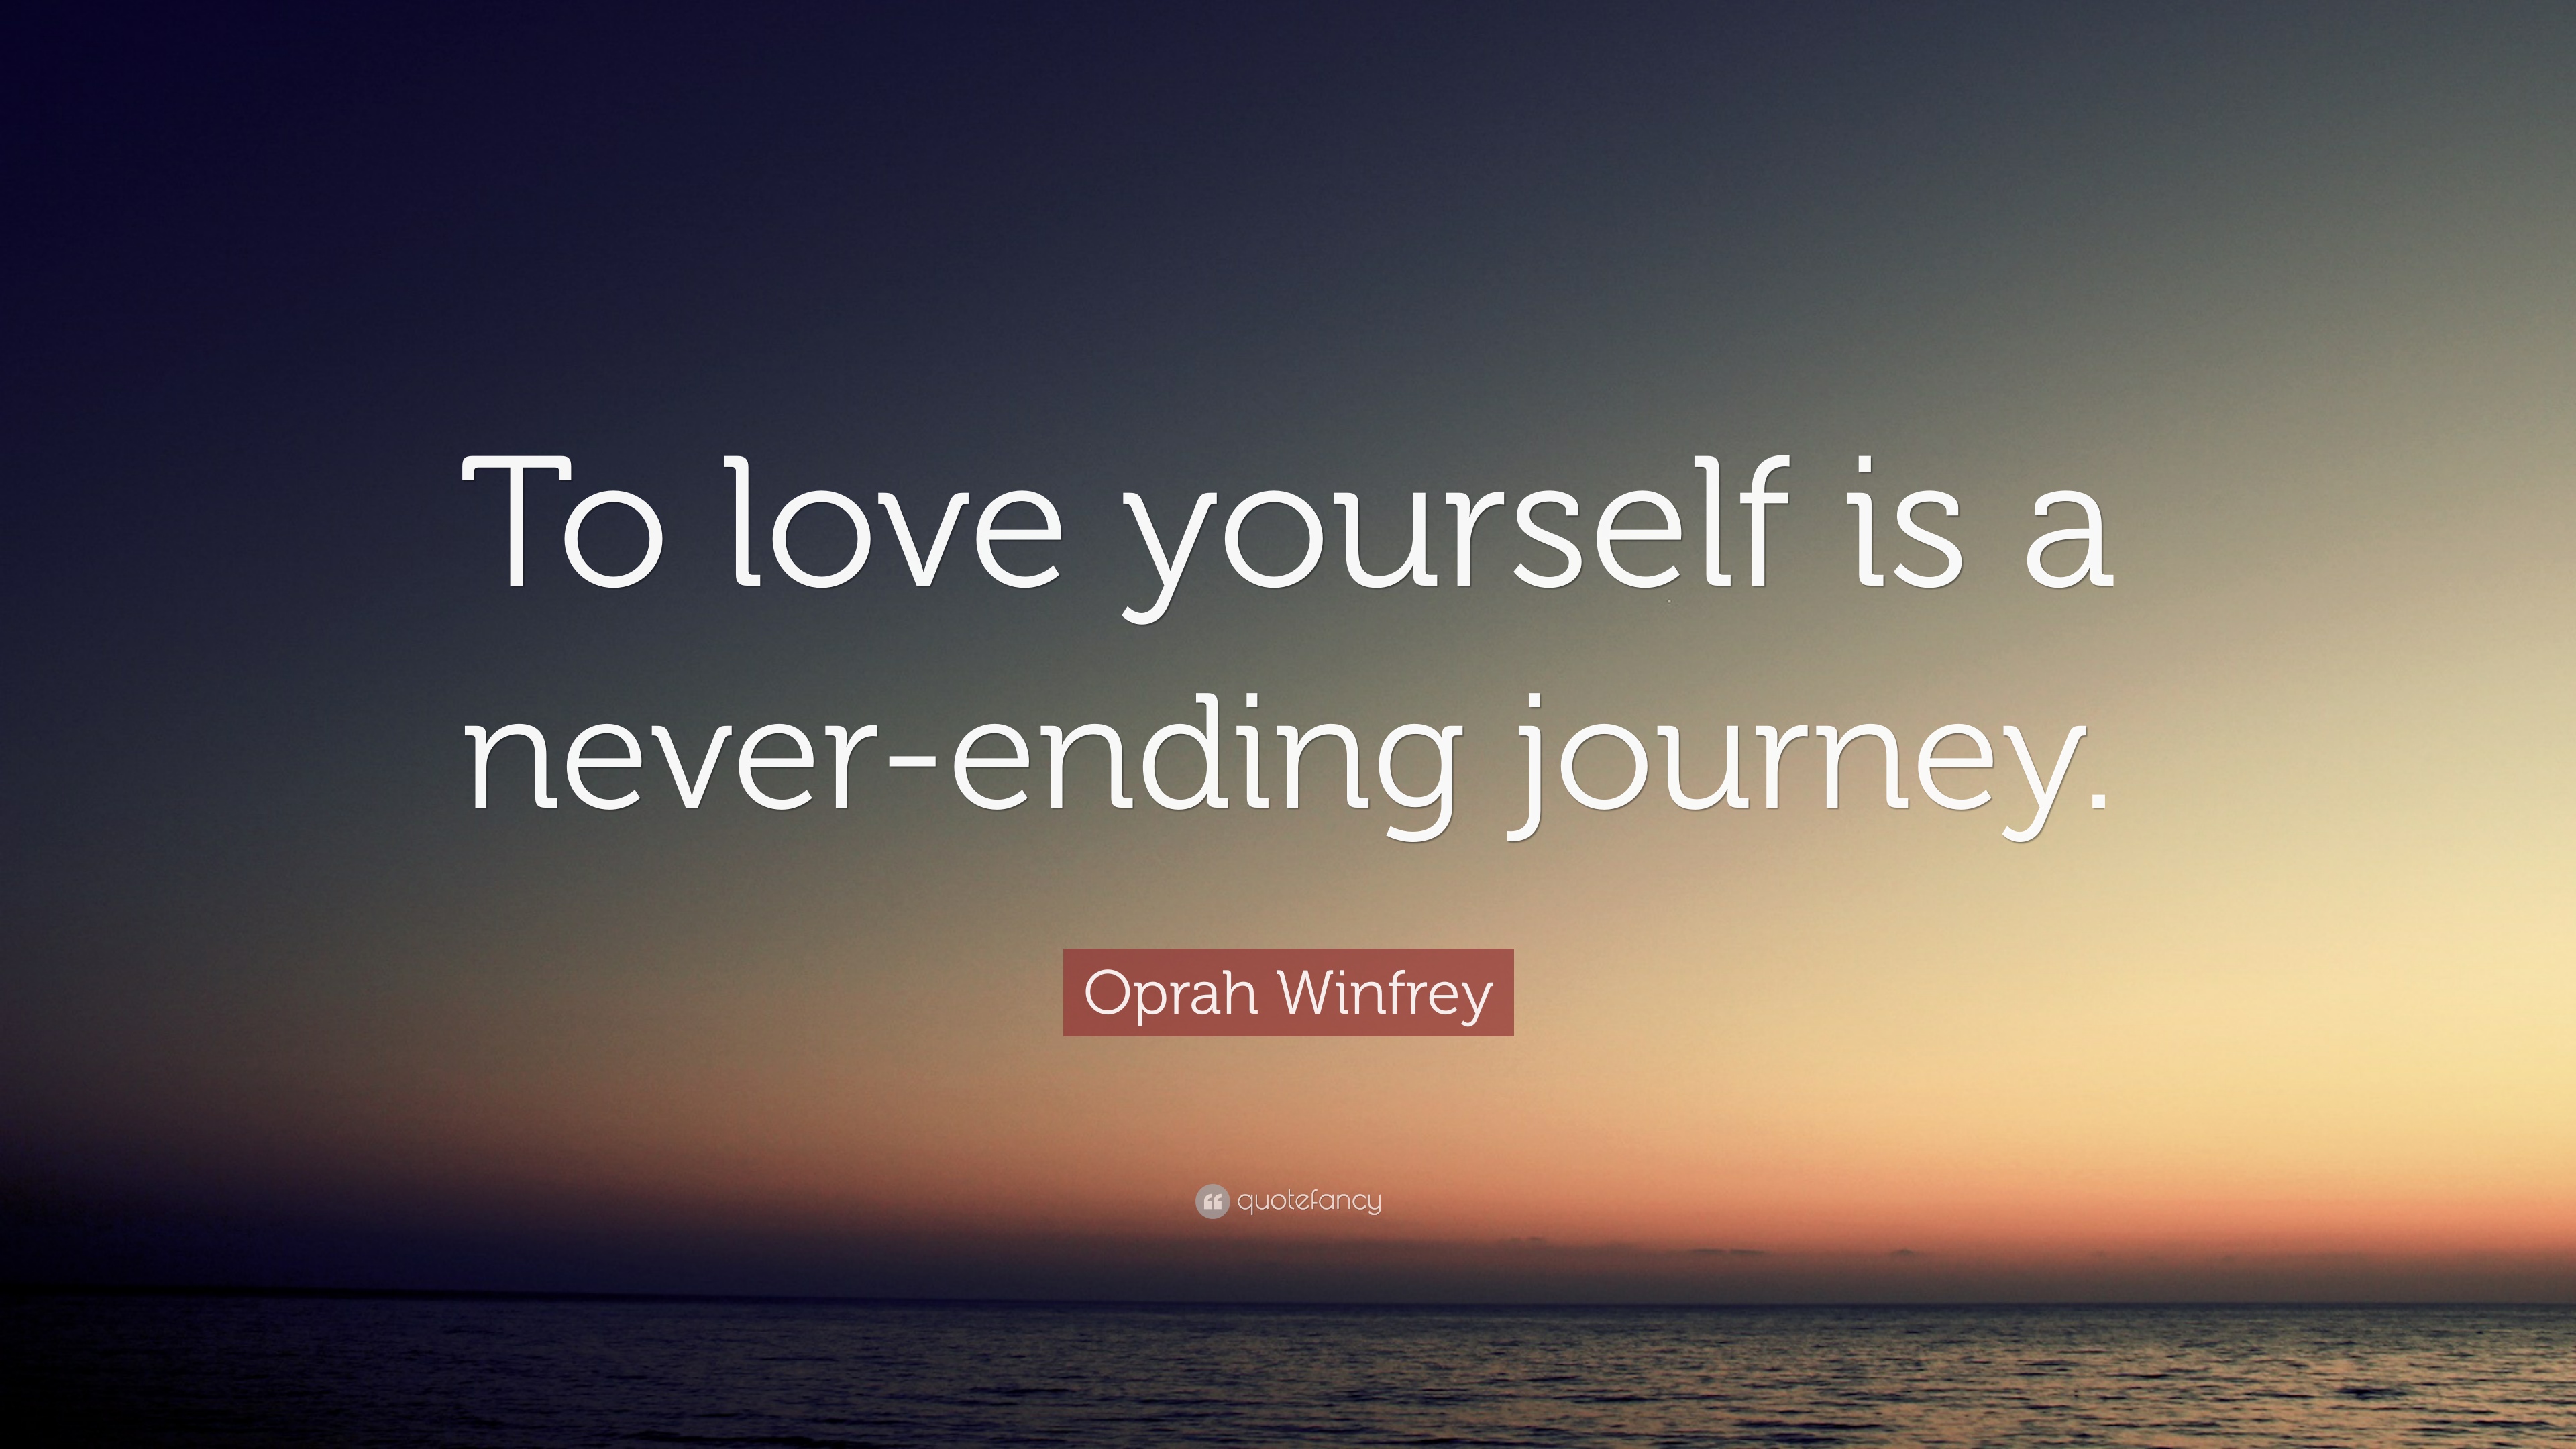 Oprah Winfrey Quote: “To love yourself is a never-ending journey ...